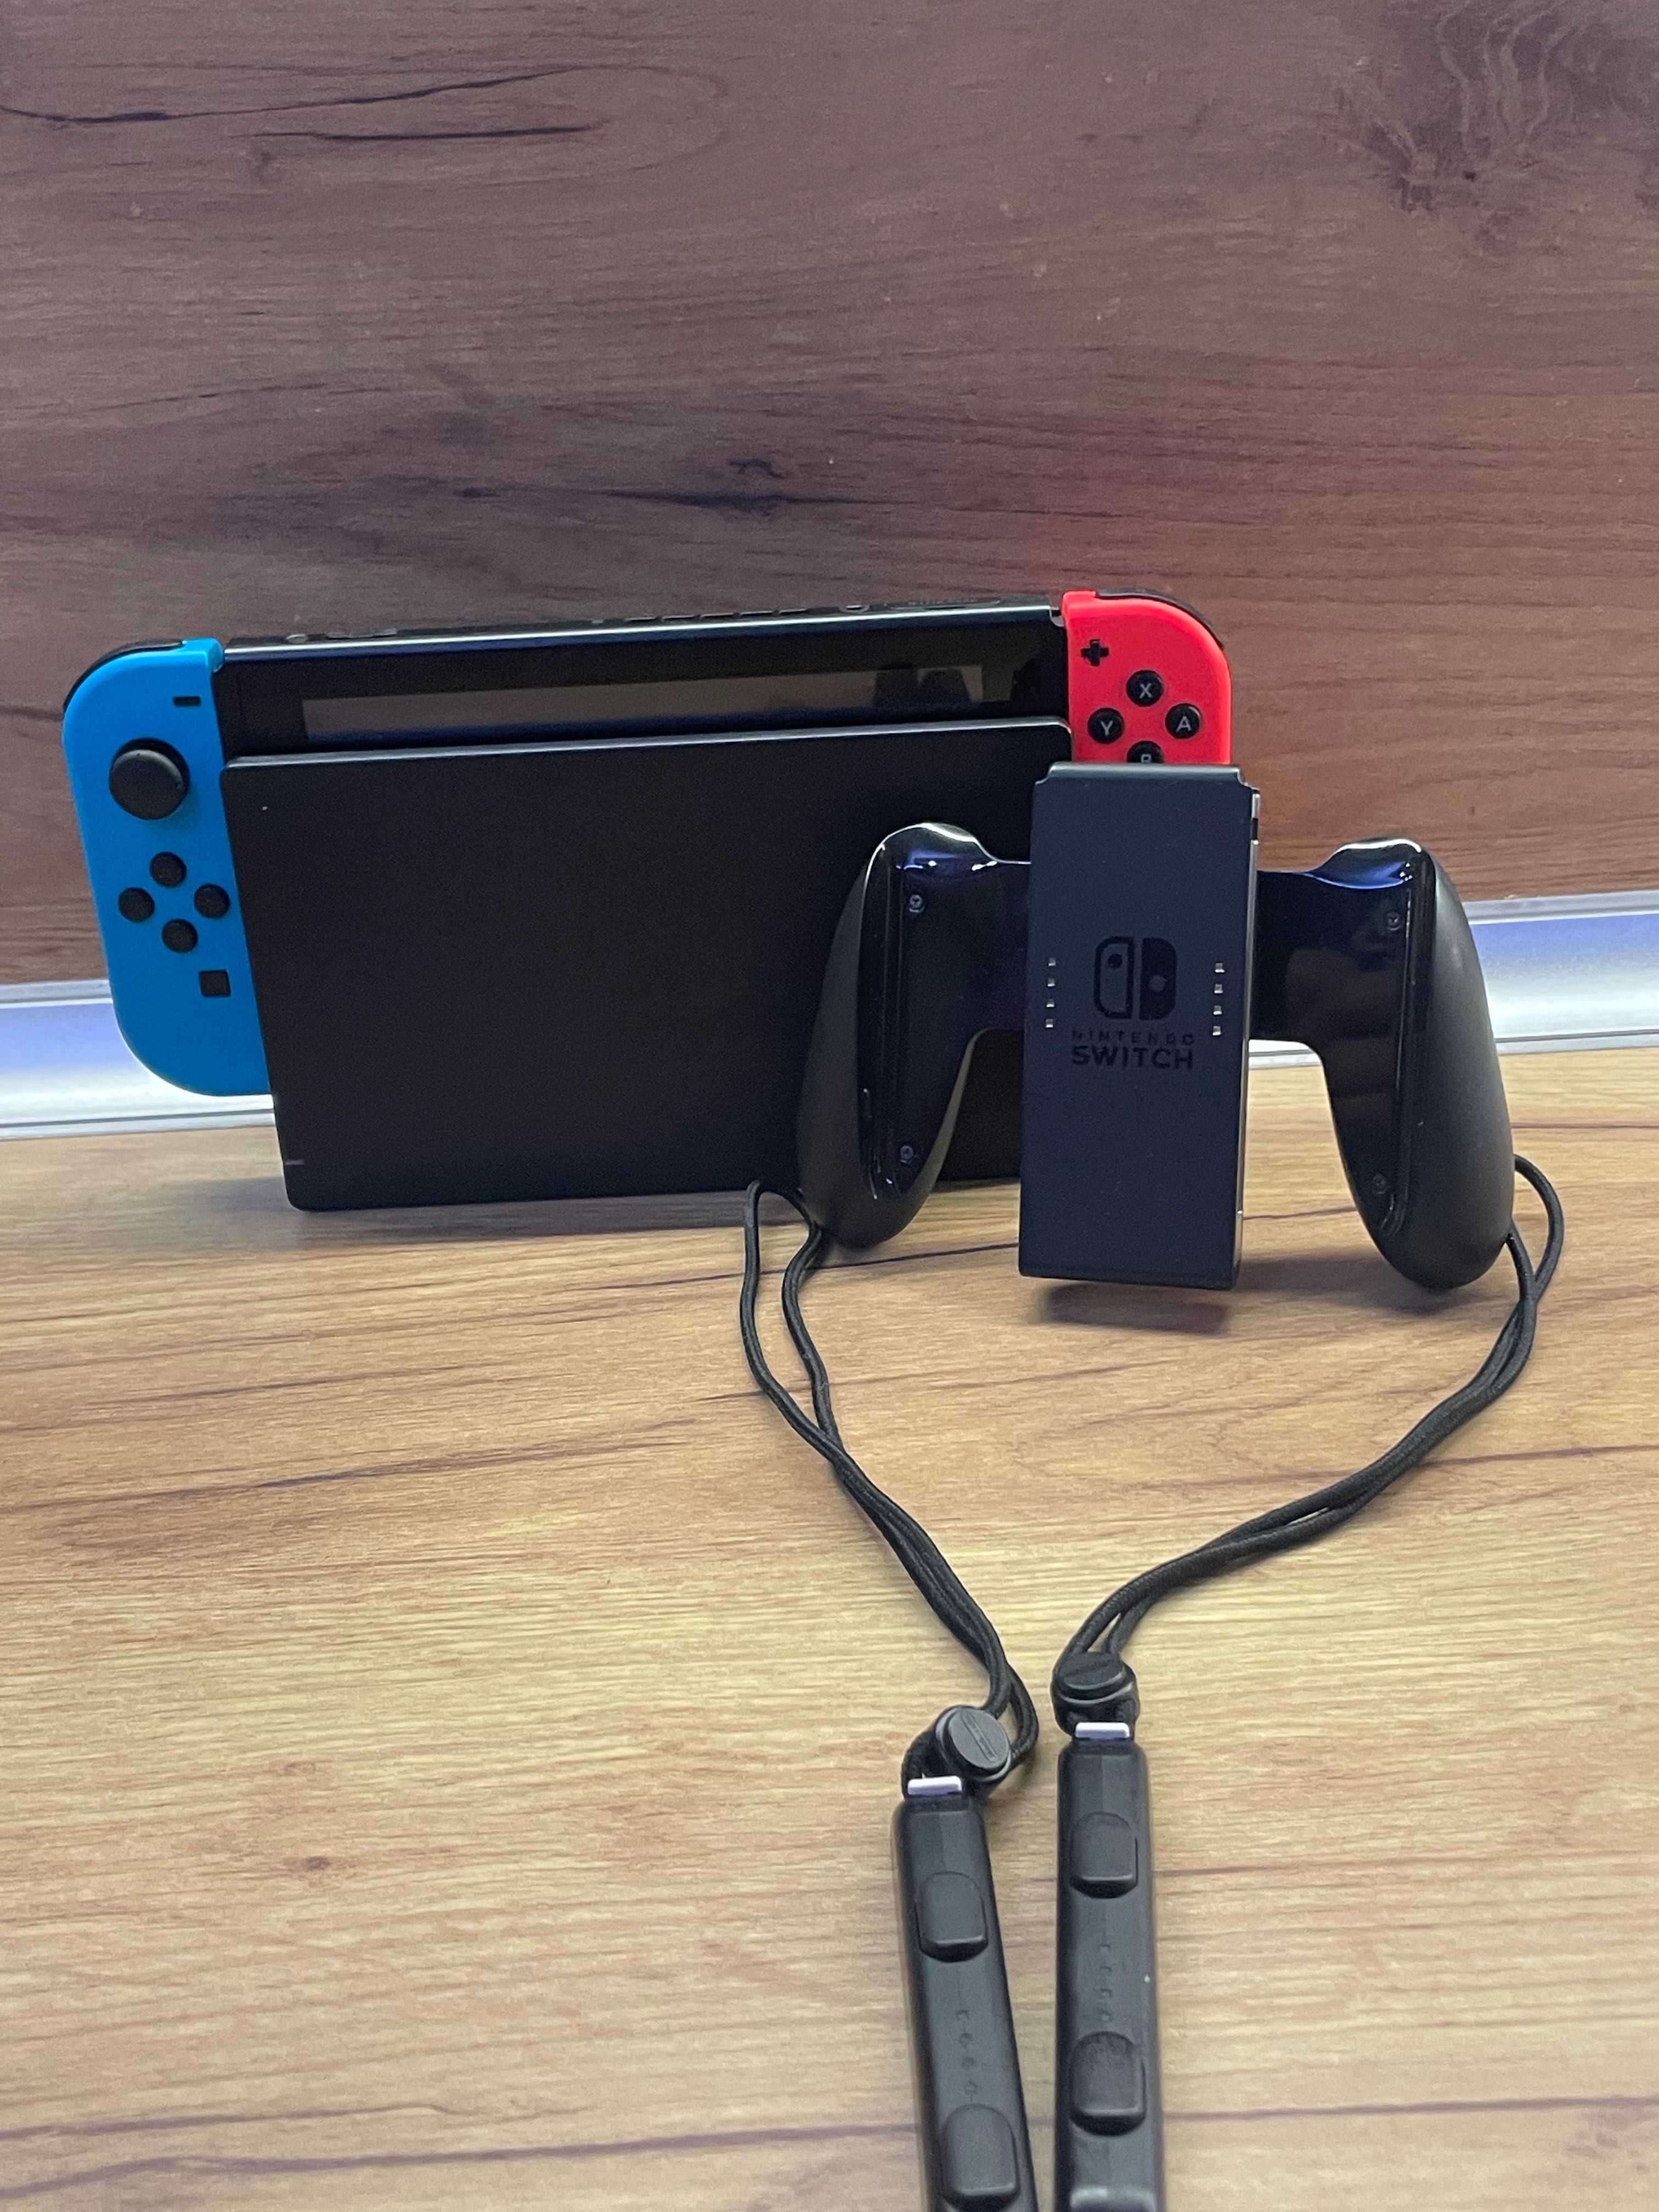 Nintendo switch red and blue